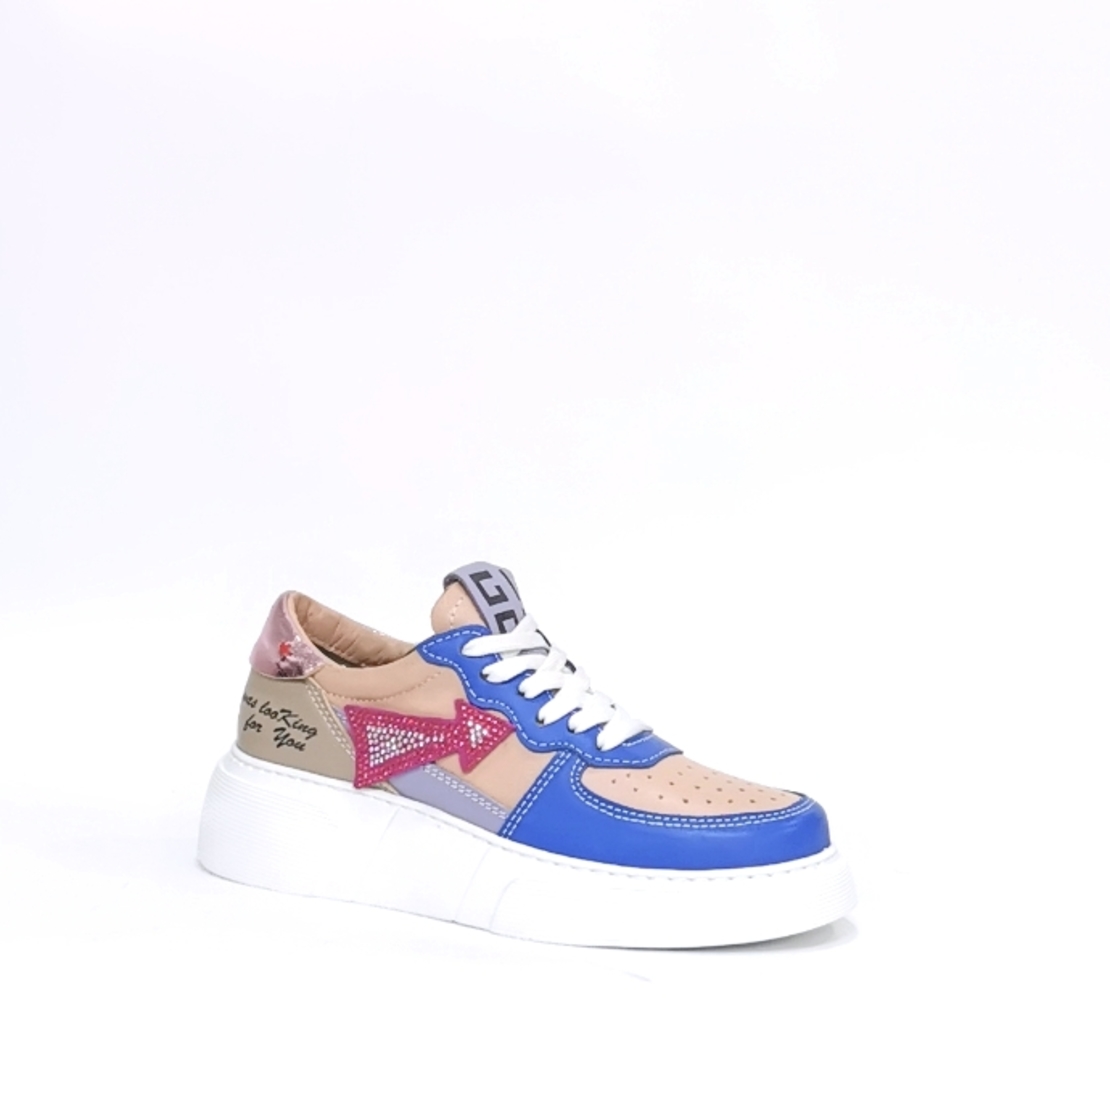 Women's sneaker made of natural leather in the color blue + powder with anatomical insole/73326